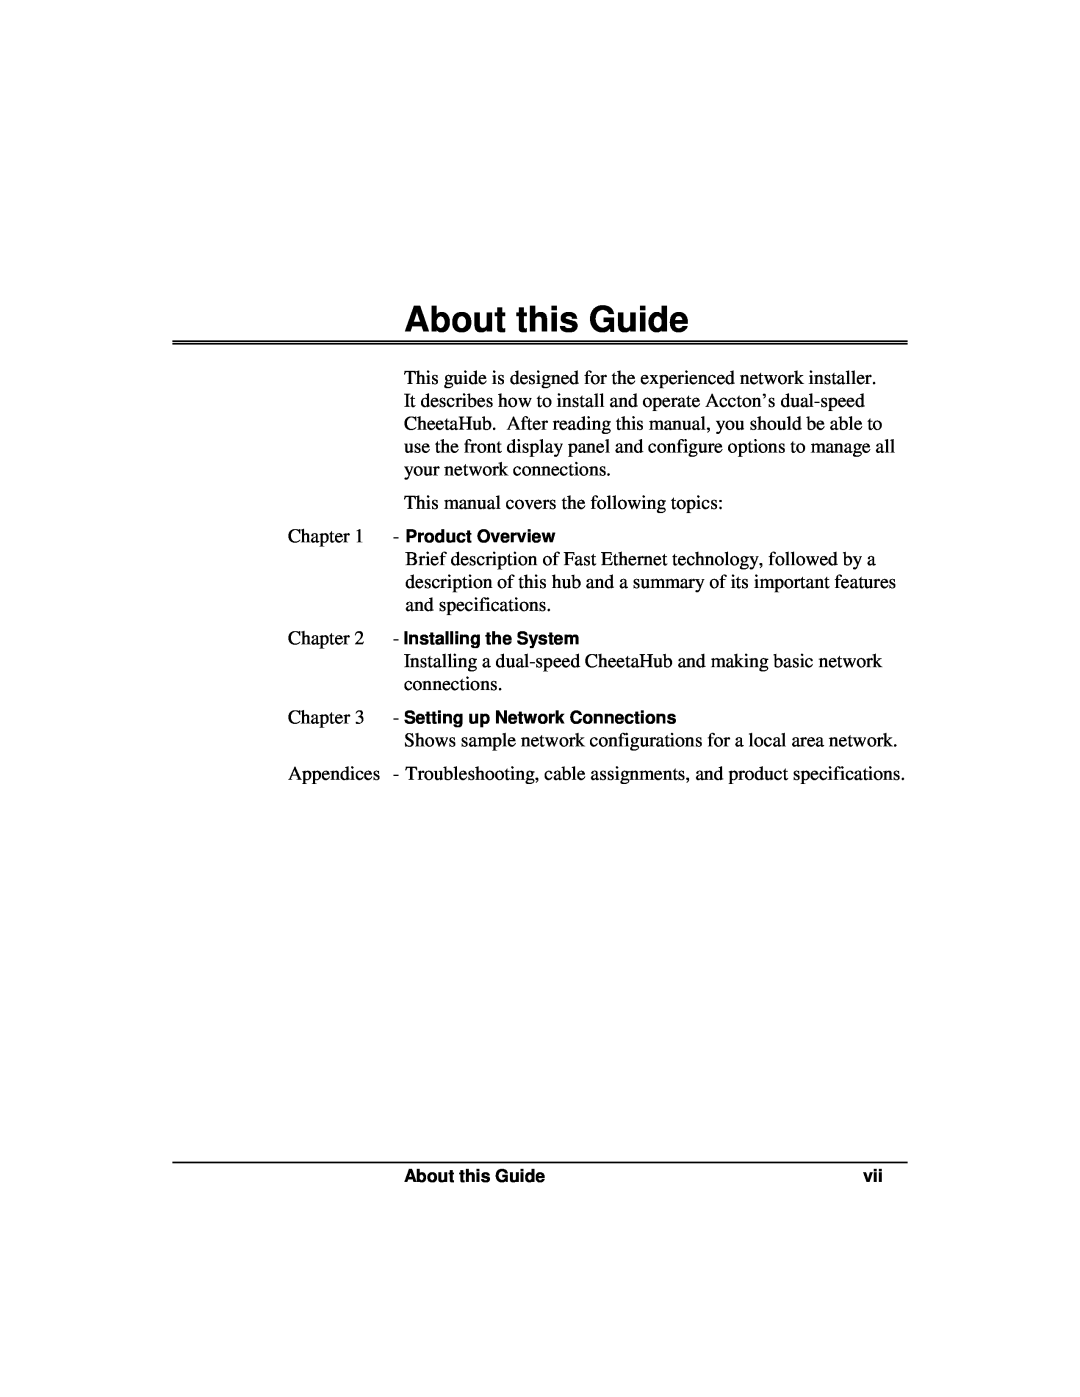 Accton Technology 3012B manual About this Guide 